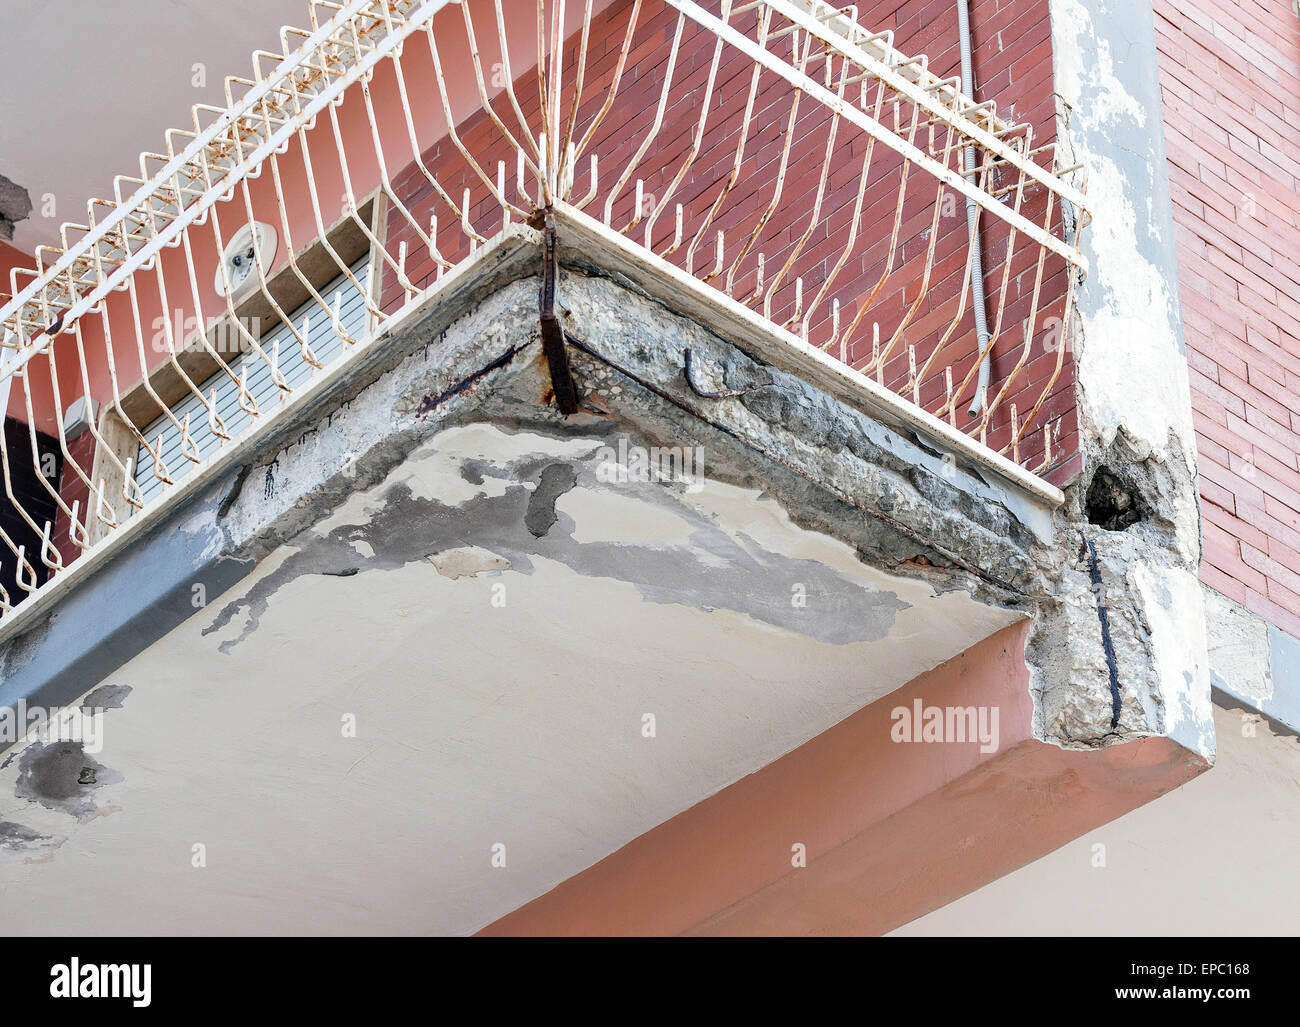 Balconies with cracked concrete and rusty irons requiring renovation. Stock Photo